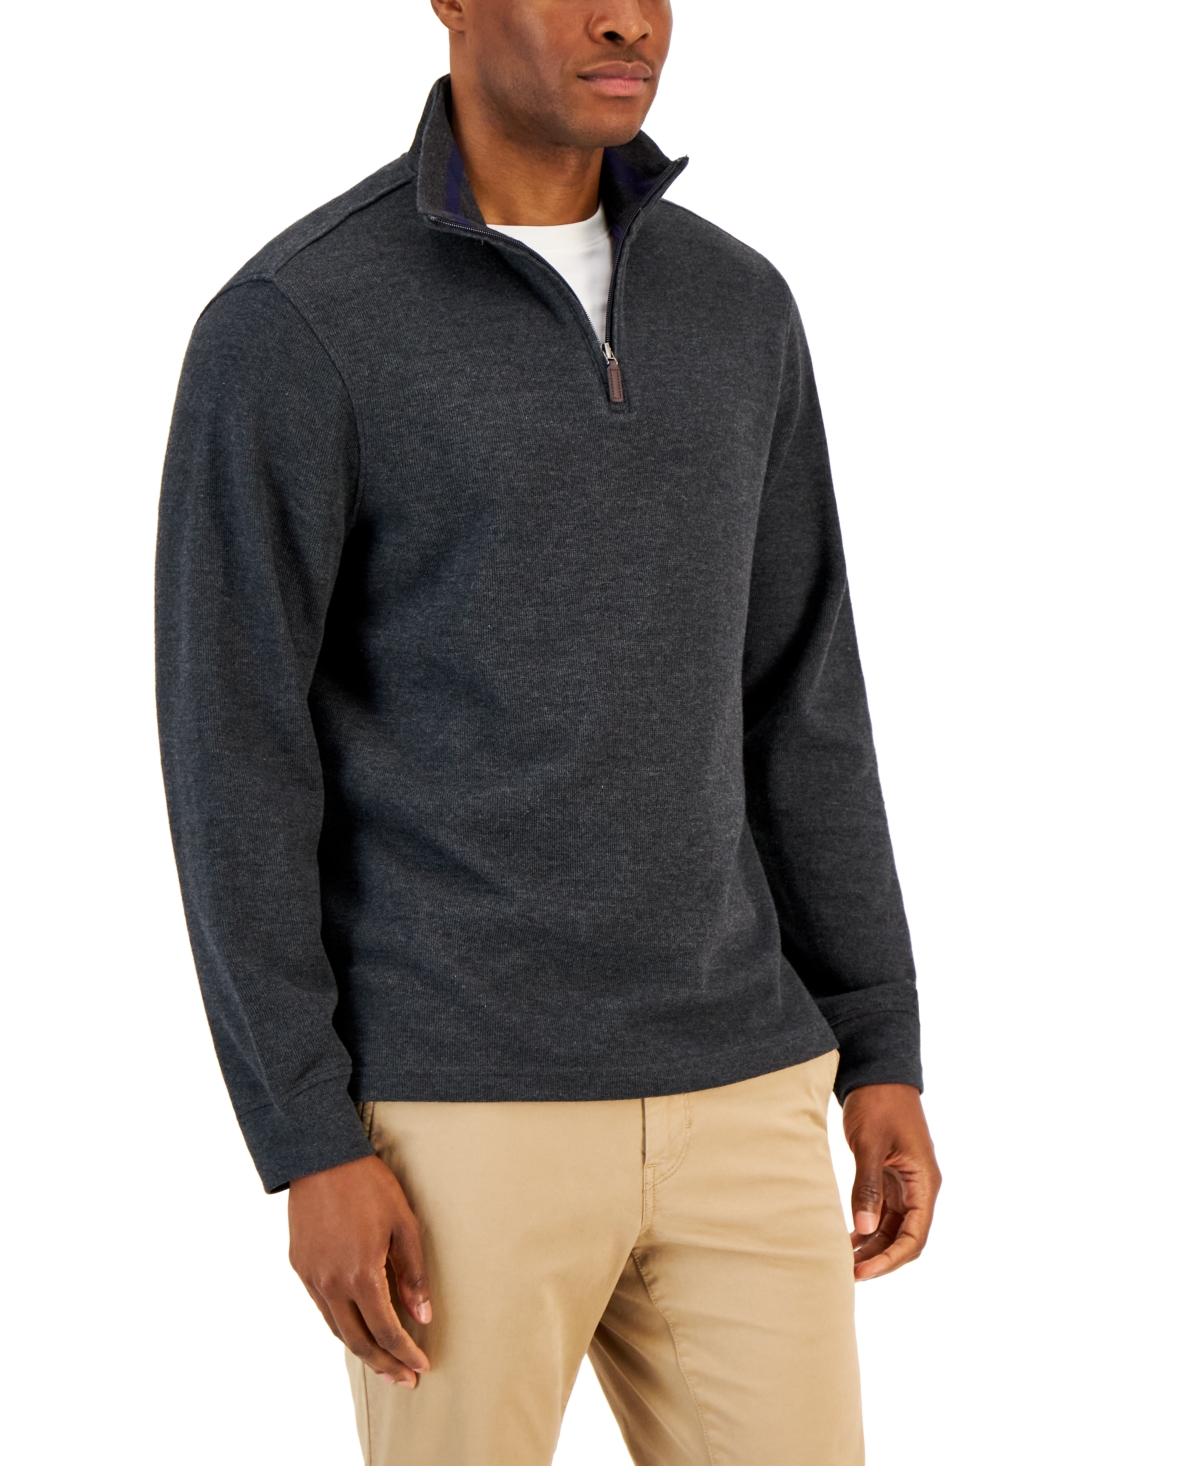 Men's Solid Classic-Fit French Rib Quarter-Zip Sweater, Created for Macy's - Dark Lead